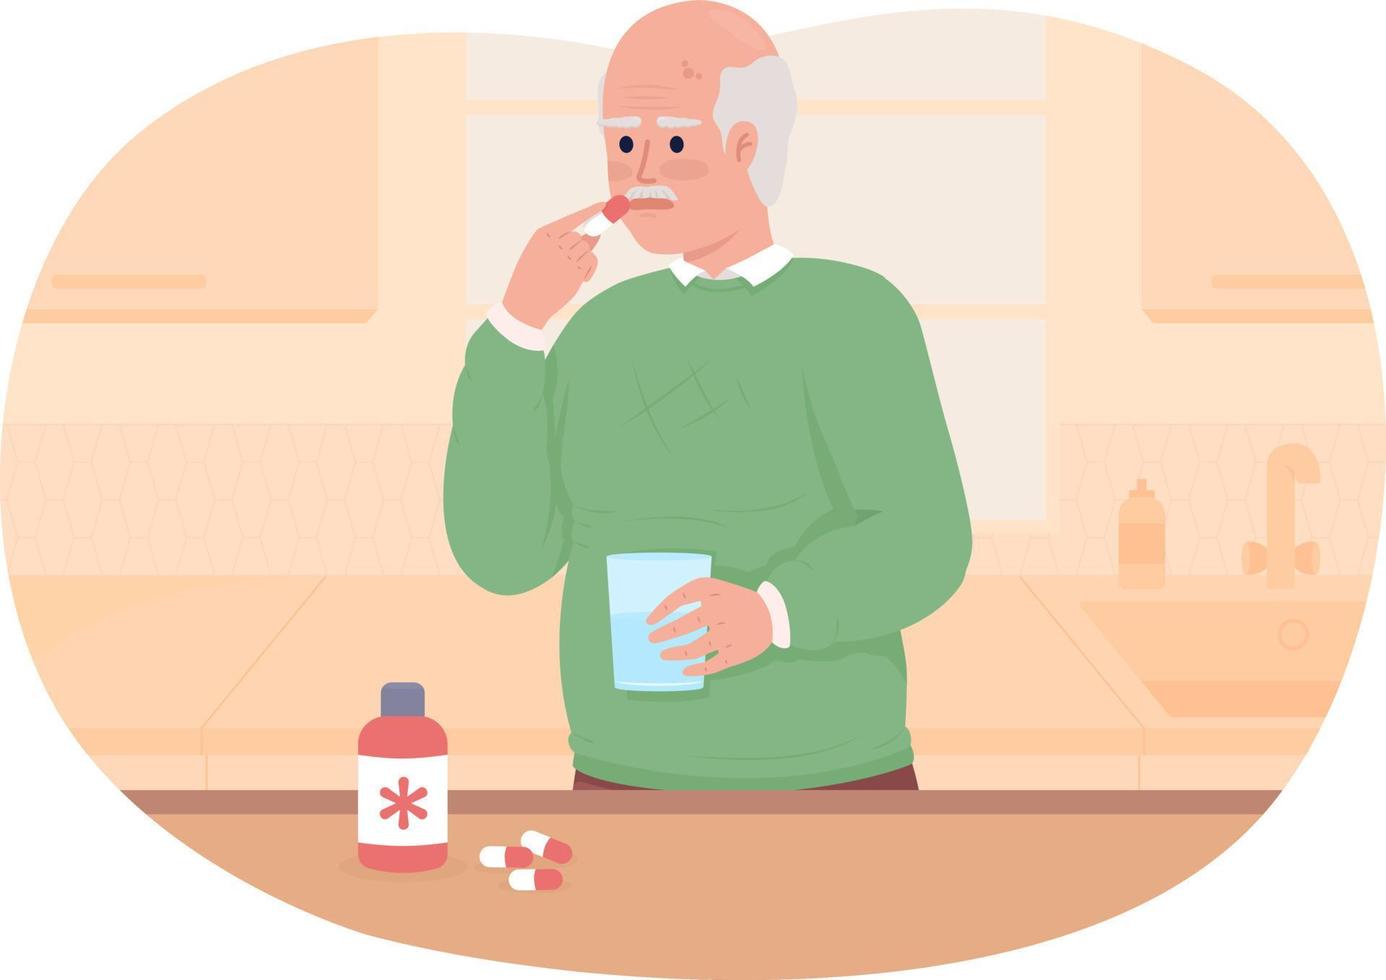 Old man taking medicine at home 2D vector isolated illustration. Vitamin dose. Elderly healthcare flat character on cartoon background. Colourful editable scene for mobile, website, presentation